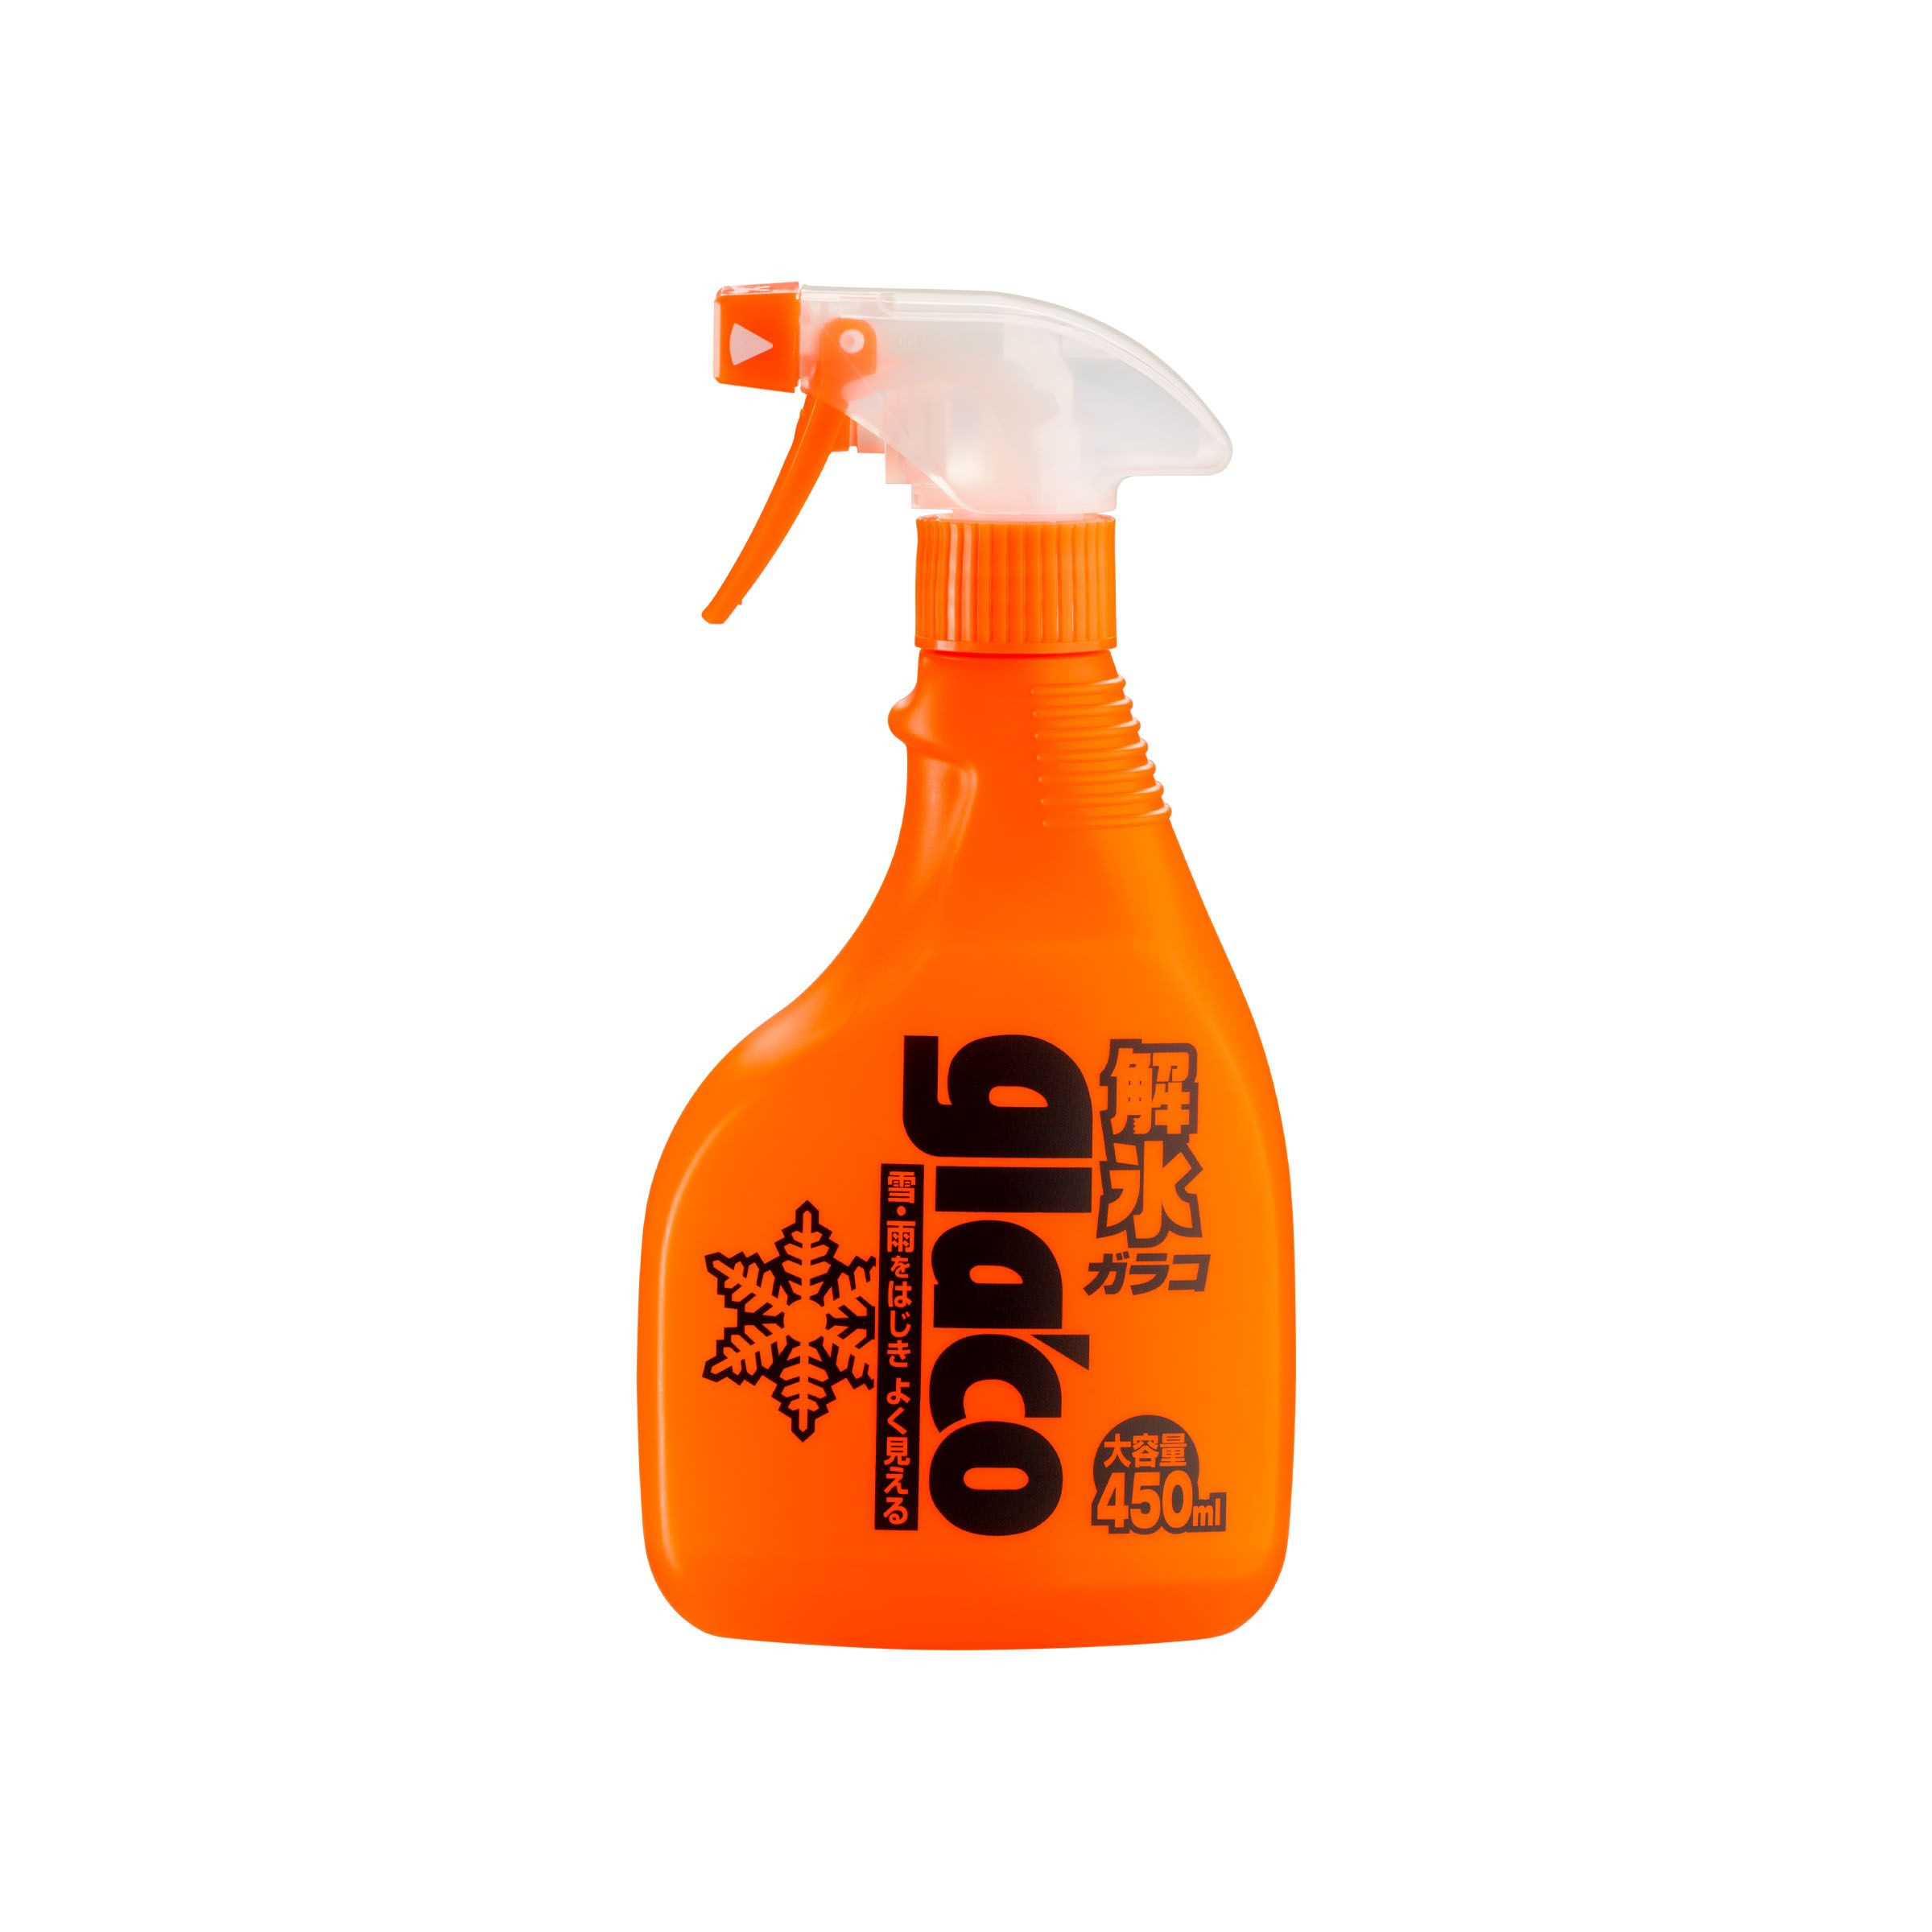 Glaco Deicer + GIFT, defrosting agent and glass coating, 450 ml